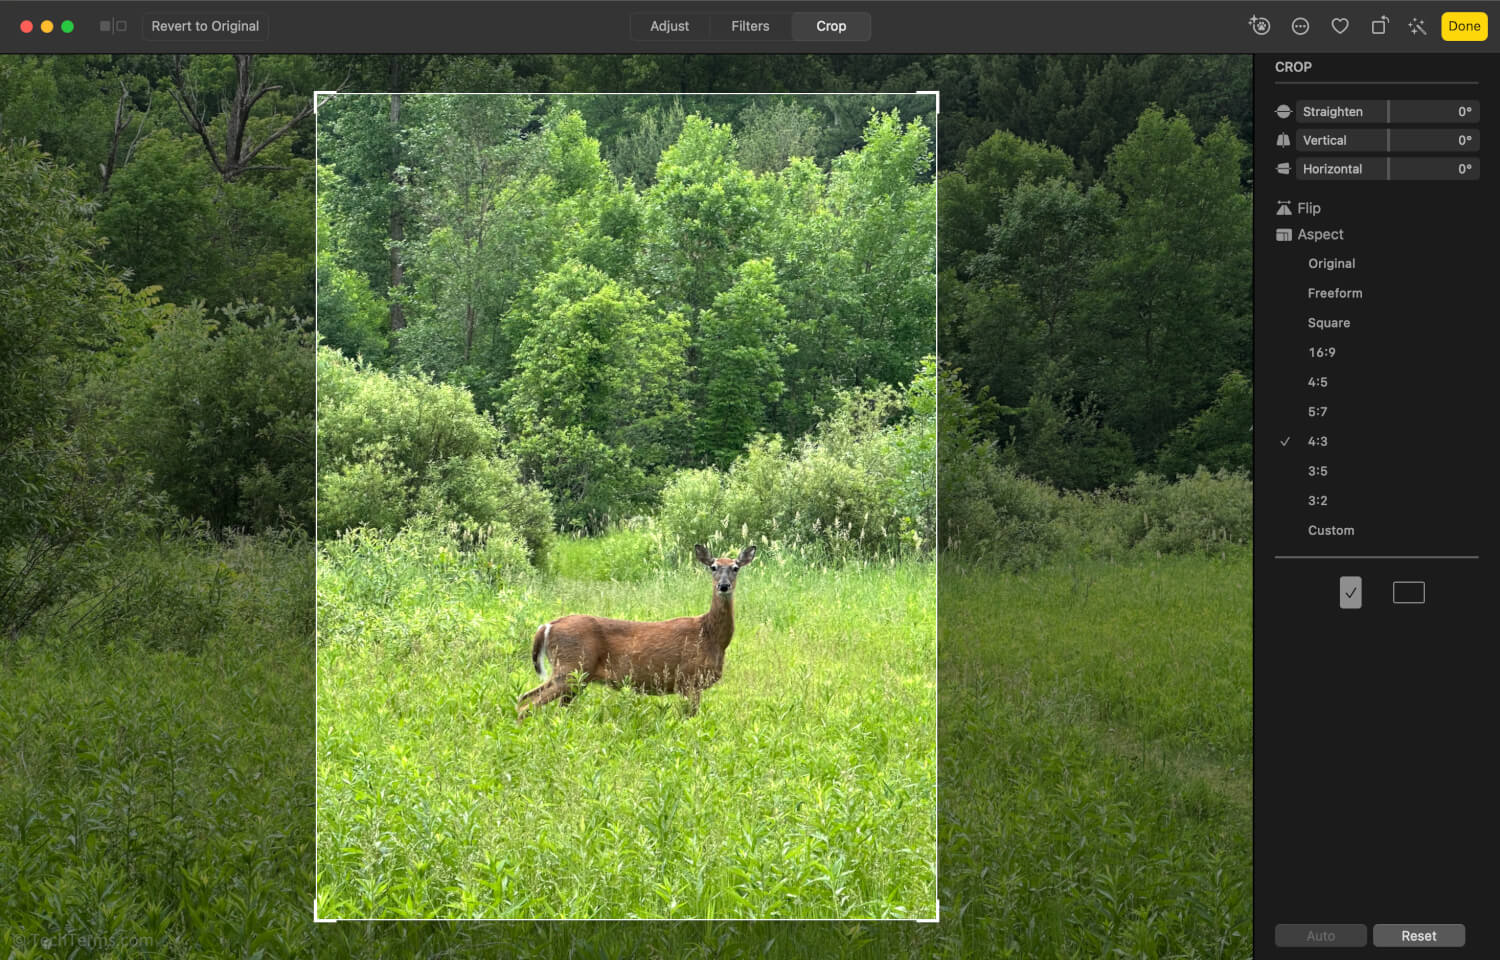 Cropping a photo in Apple Photos to change its aspect ratio and emphasize the subject